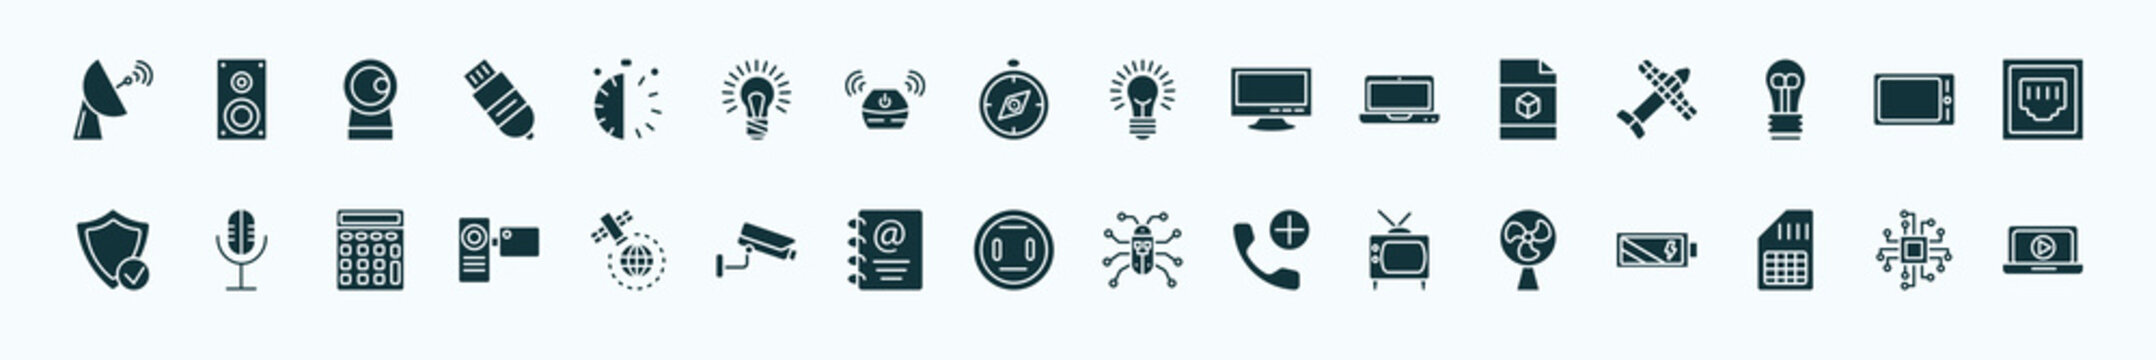 flat filled technology icons set. glyph icons such as satellite station, half hour, light on, cad, horizontal tablet, basic microphone, satellite in orbit, round socket, old television, big,